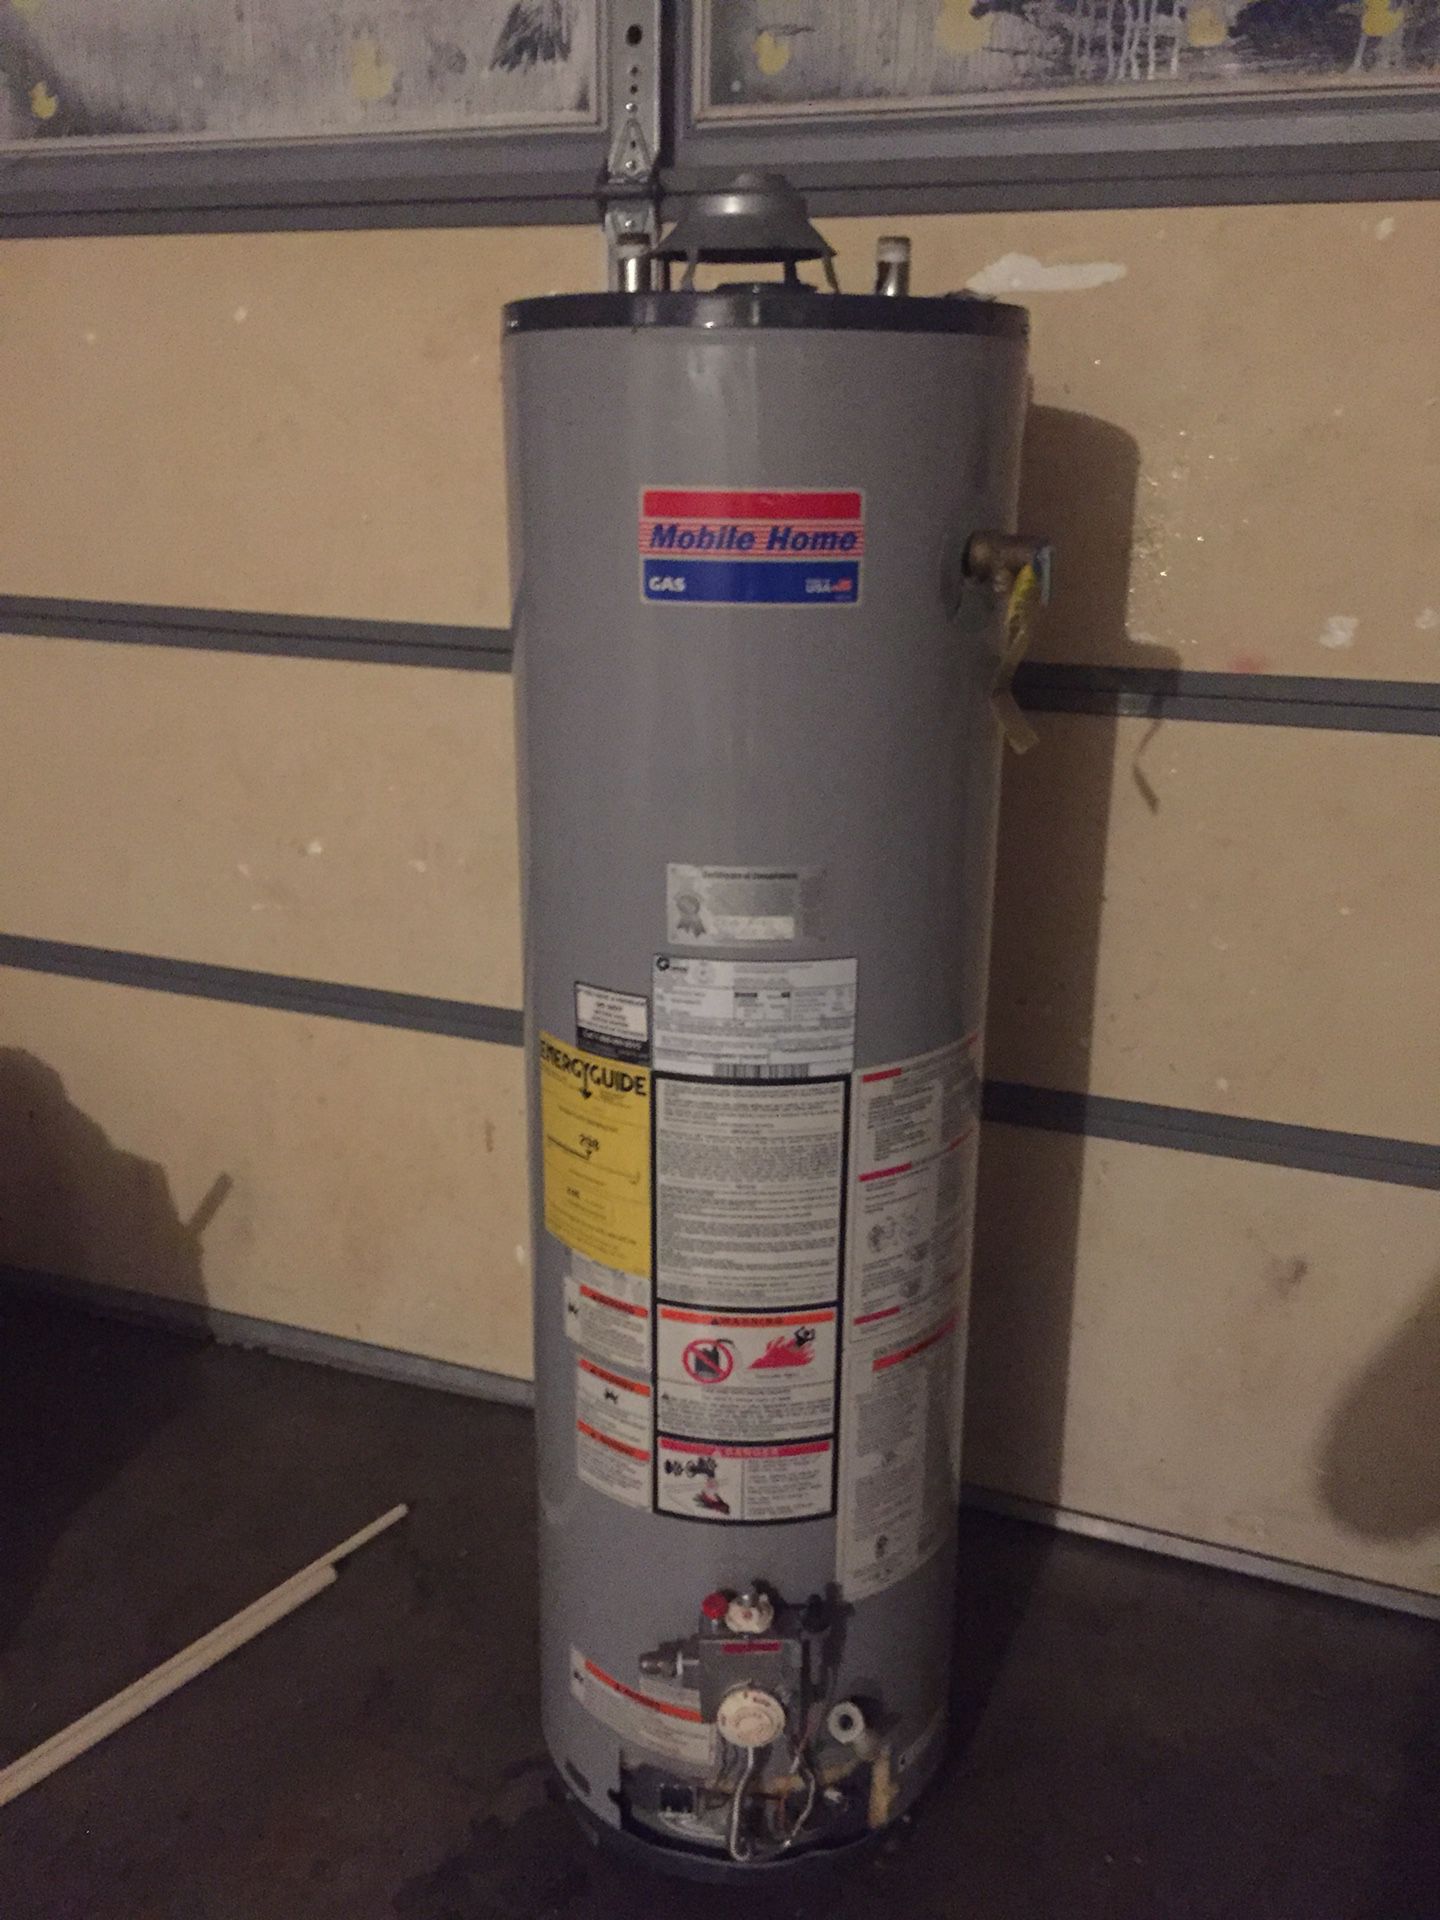 Water heater for mobile home